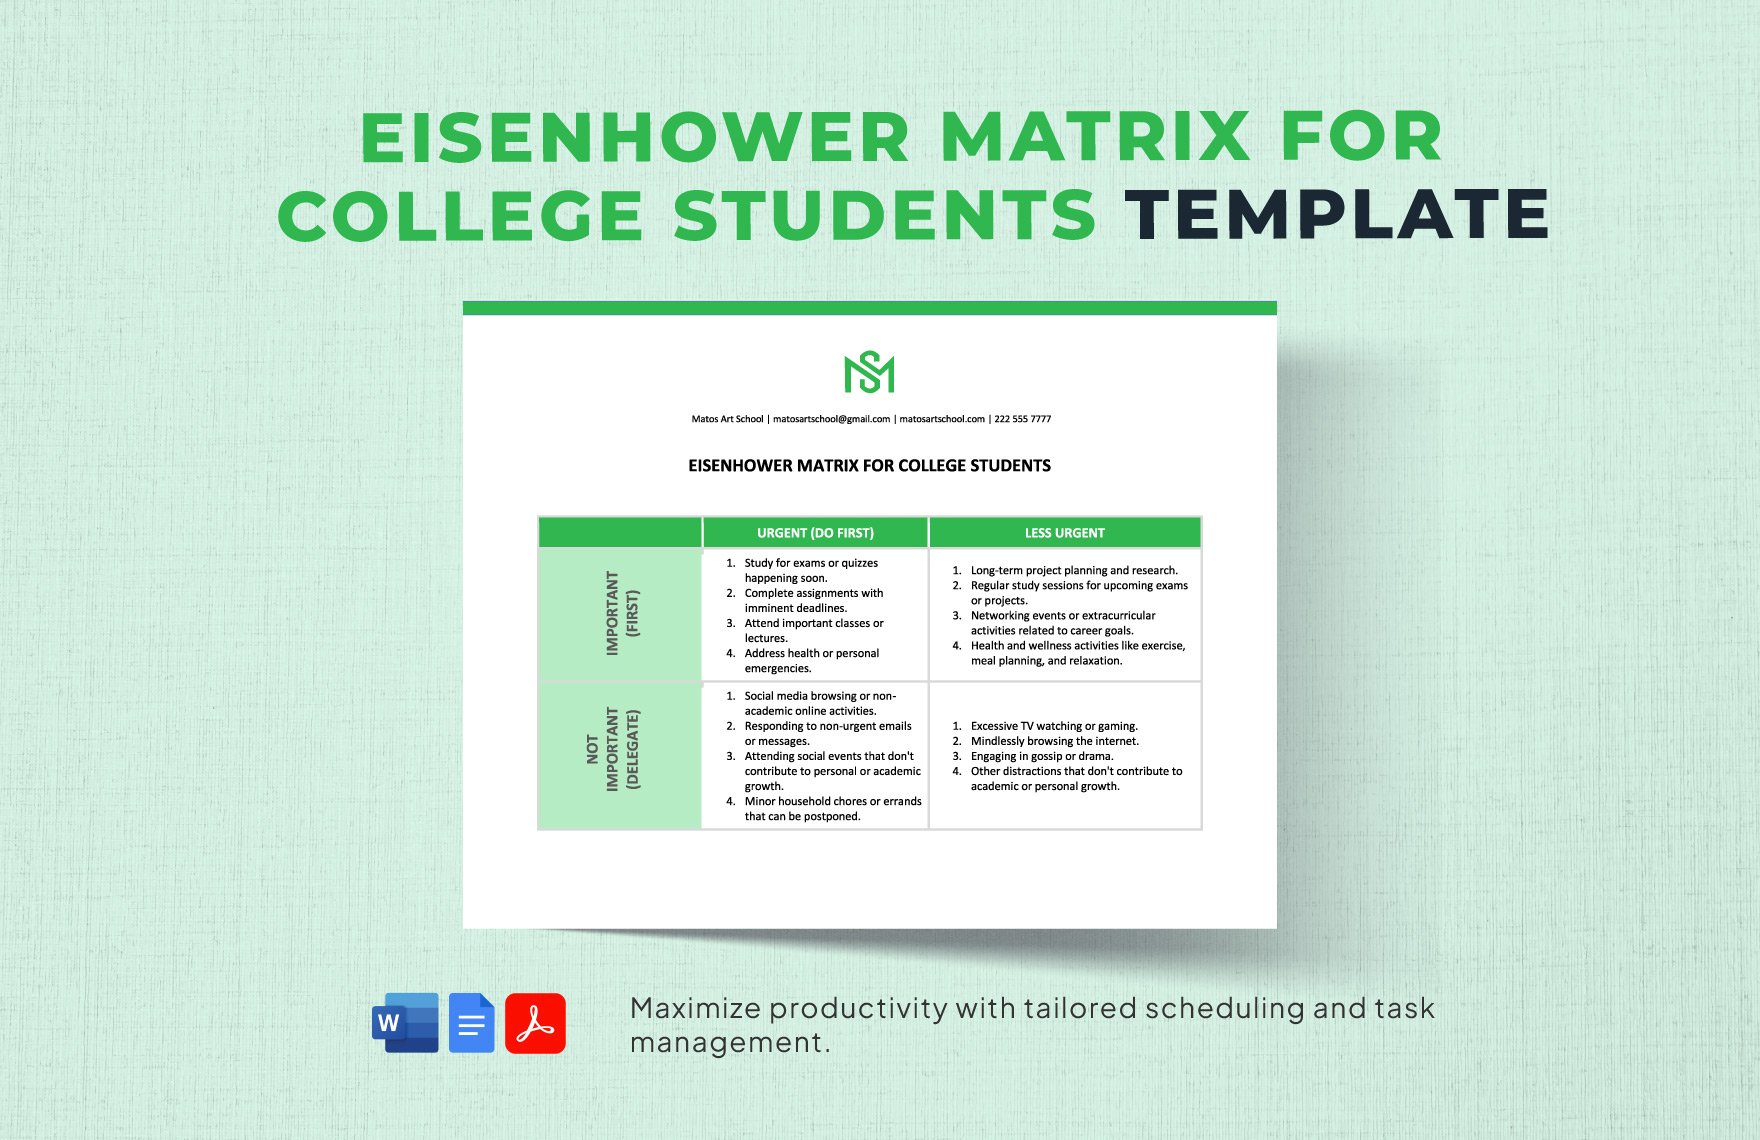 Eisenhower Matrix for College Students Template